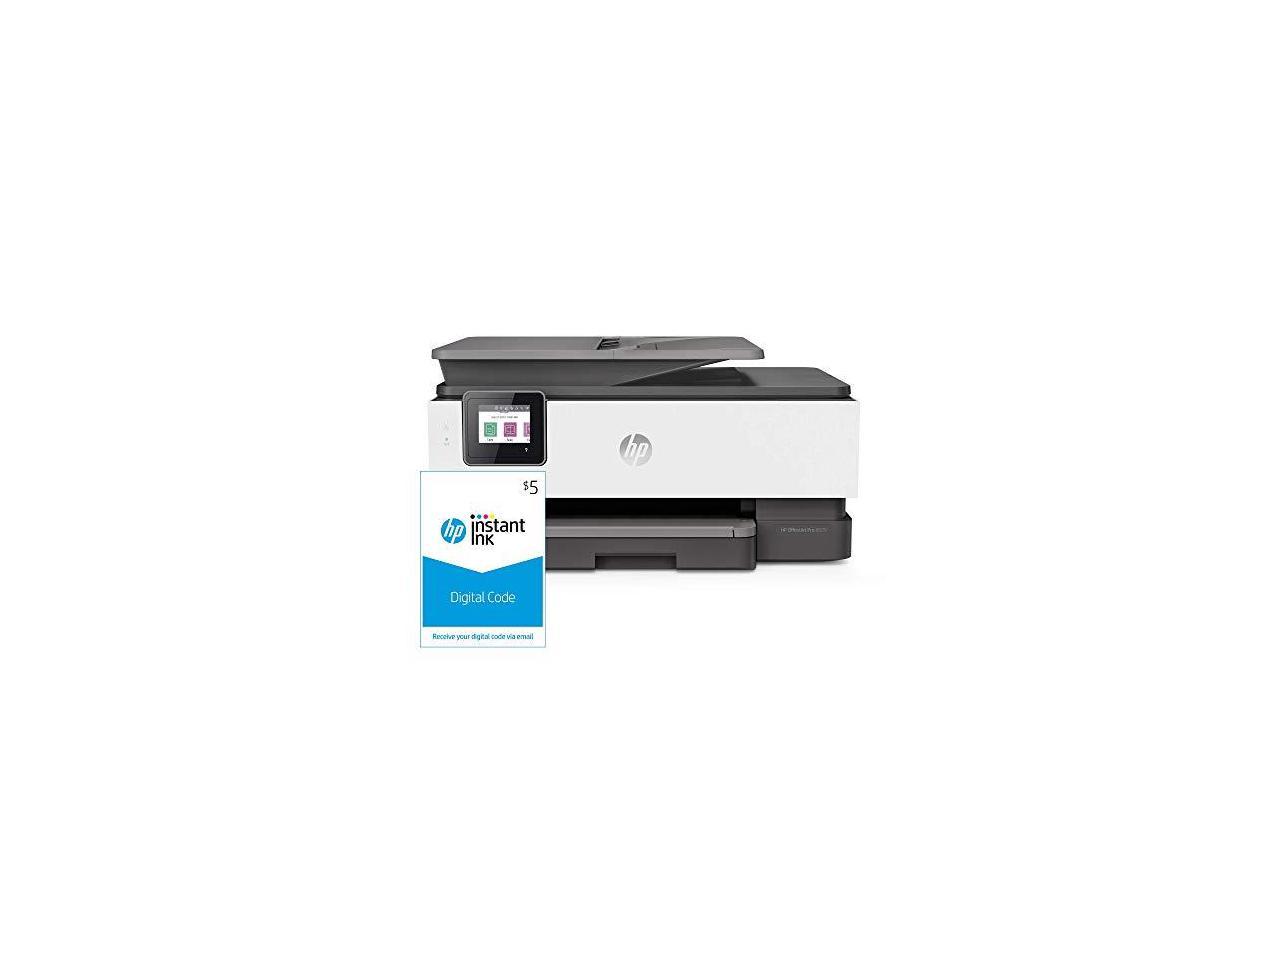 OfficeJet Pro 8025 AllinOne Wireless Printer 1KR57A and Instant Ink $5 Prepaid Code